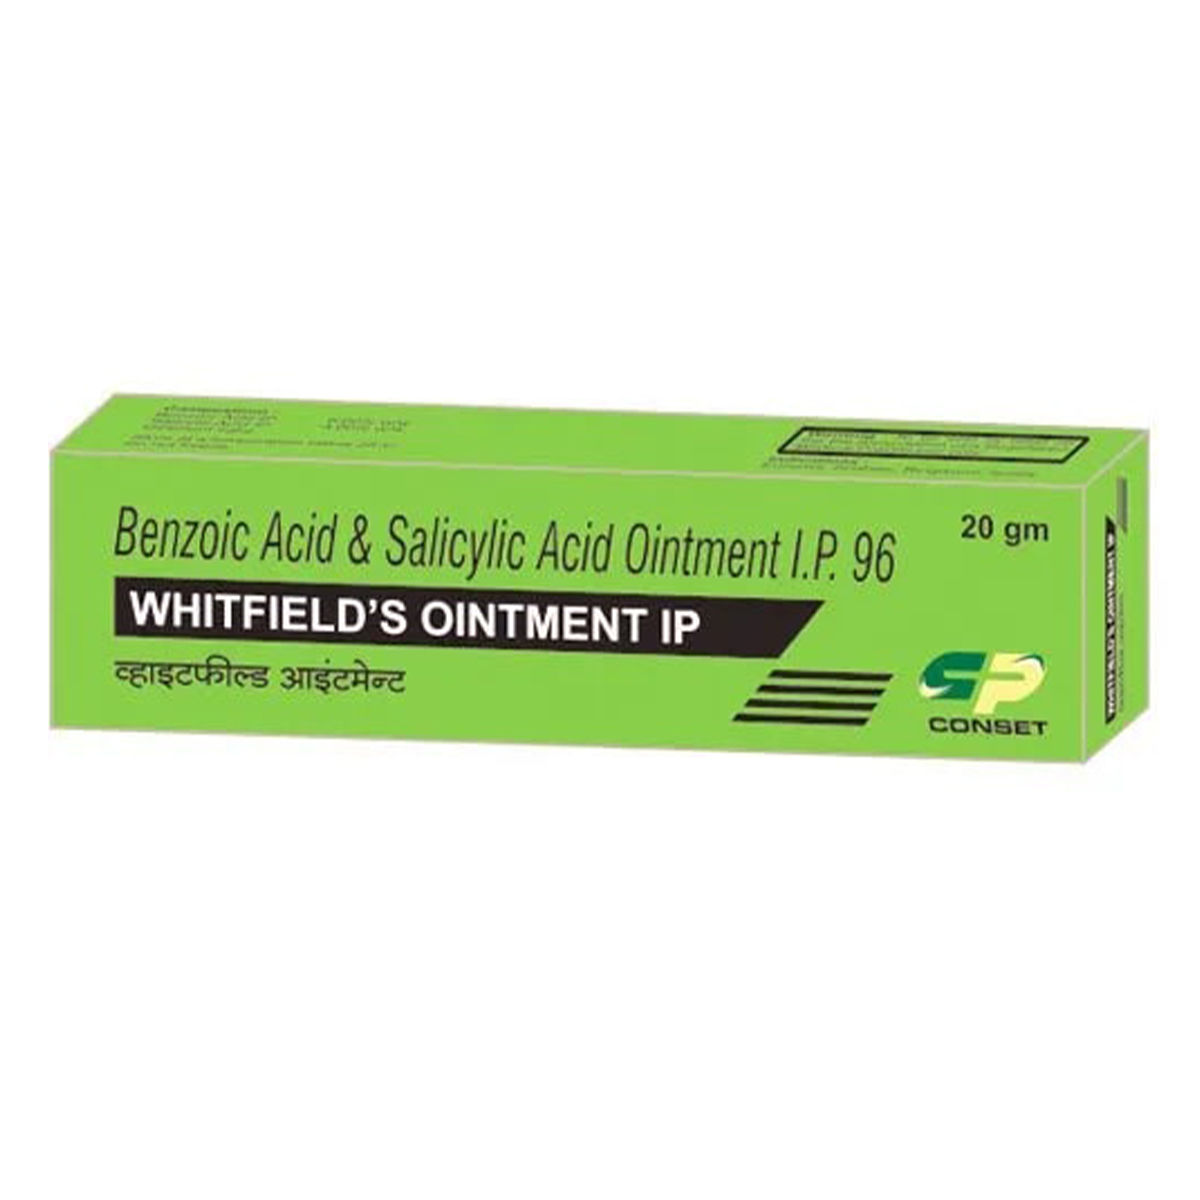 Whitfield's Ointment 1oz, USP Topical Antifungals 1 oz (28gr) | eBay